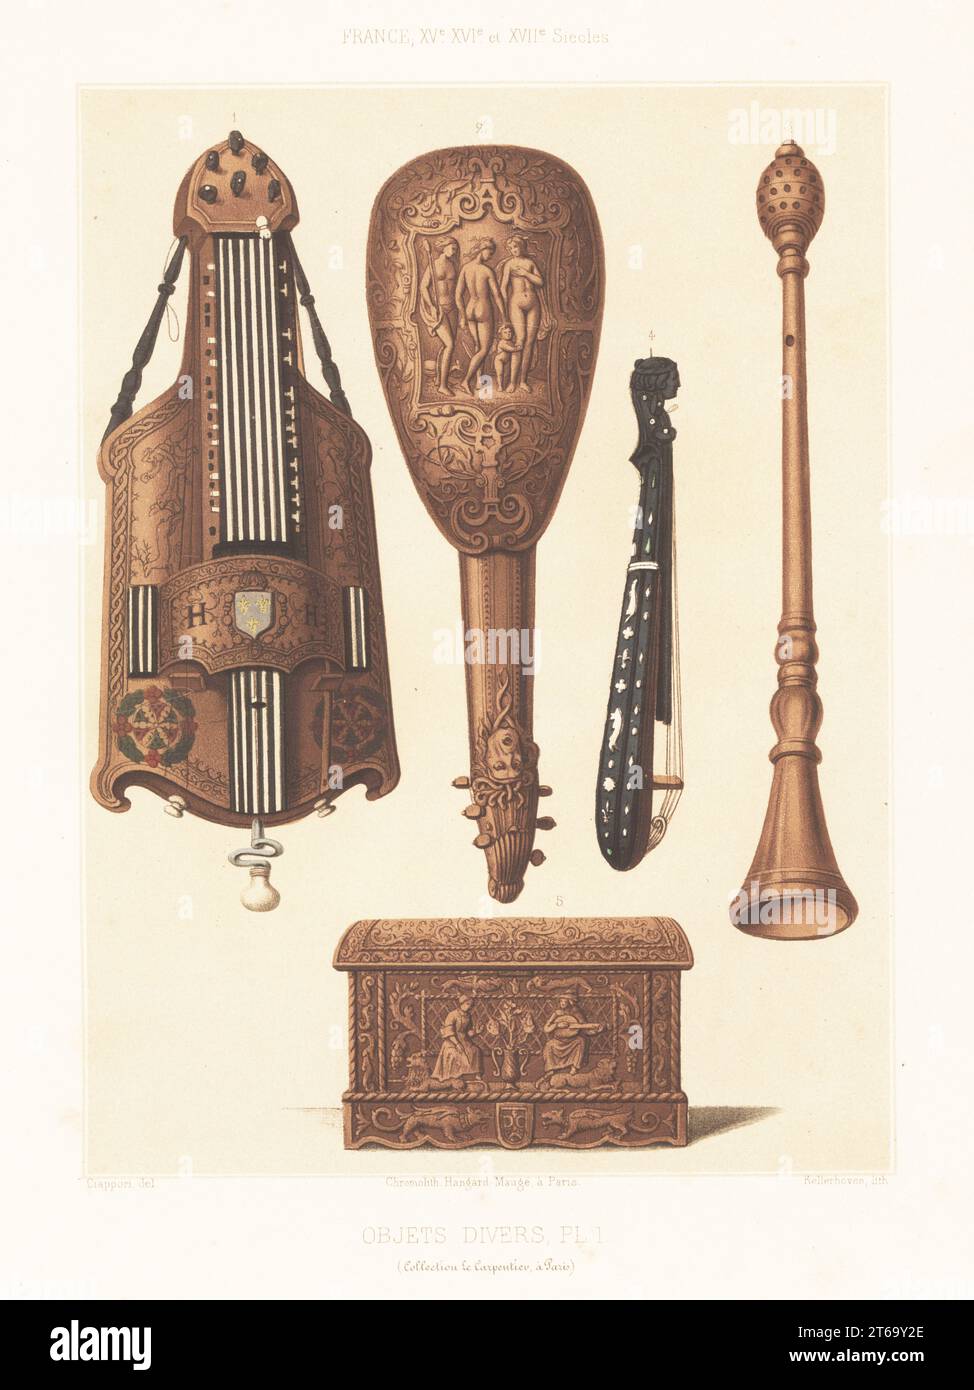 Musical instruments, France, 15th to 17th century. Vielle or hurdy-gurdy owned by Catherine de Medicis 1, Italian mandolin 2, flute 3, pochette or pocket fiddle 4, and carved wooden box 5. Coffret et instruments de musique, XVe au XVII siecles. From the Carpentier collection. Chromolithograph by Franz Kellerhoven after an illustration by Claudius Joseph Ciappori from Charles Louandres Les Arts Somptuaires, The Sumptuary Arts, Hangard-Mauge, Paris, 1858. Stock Photo